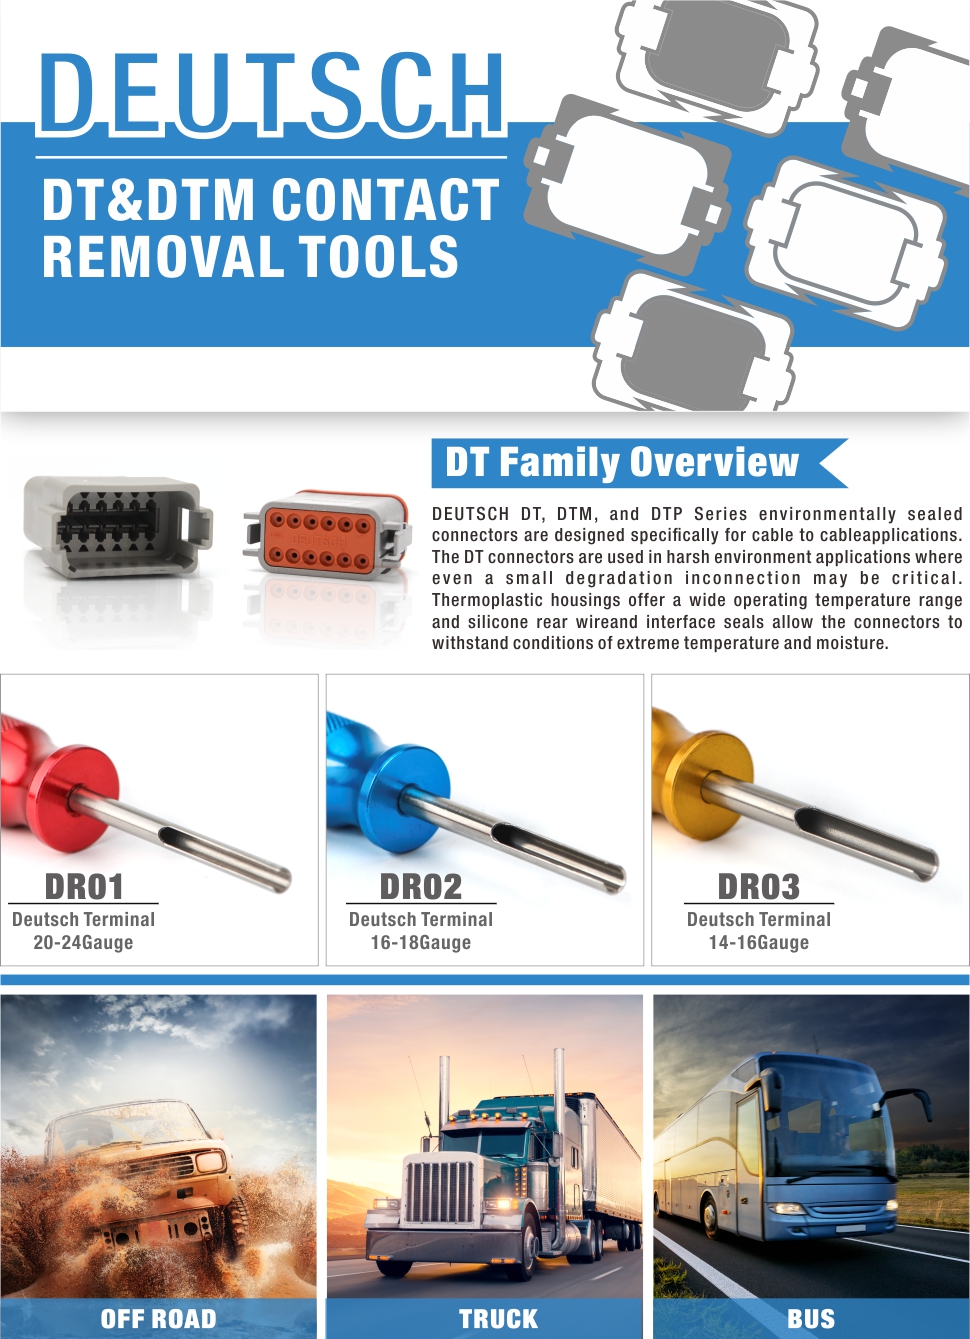 Removal tools interface